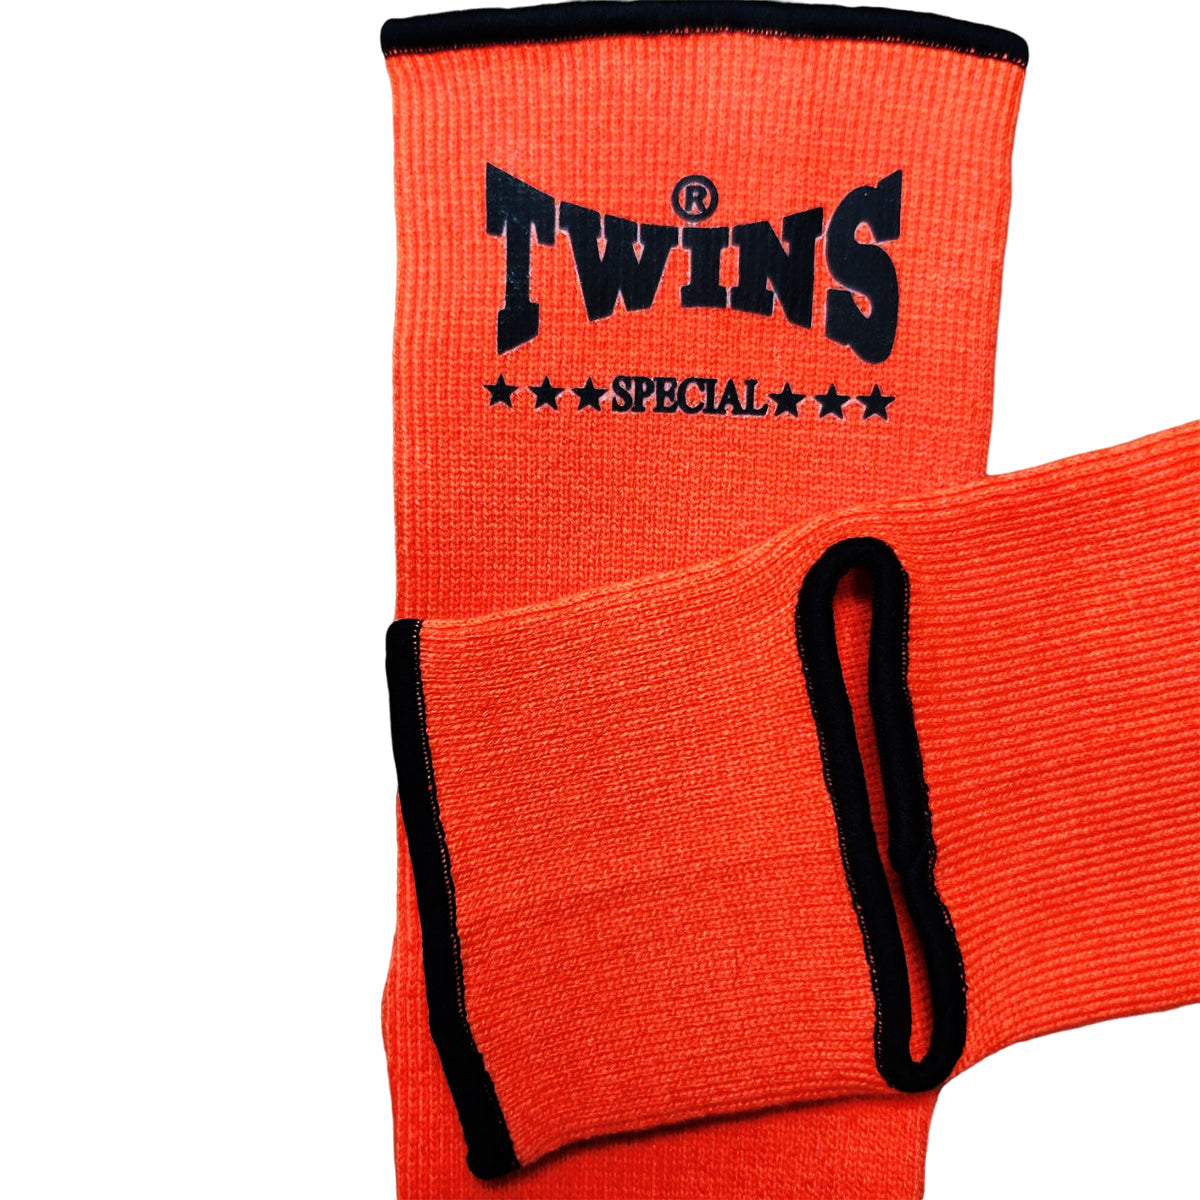 Ankle Support Twins Special AG Orange Foot Protection